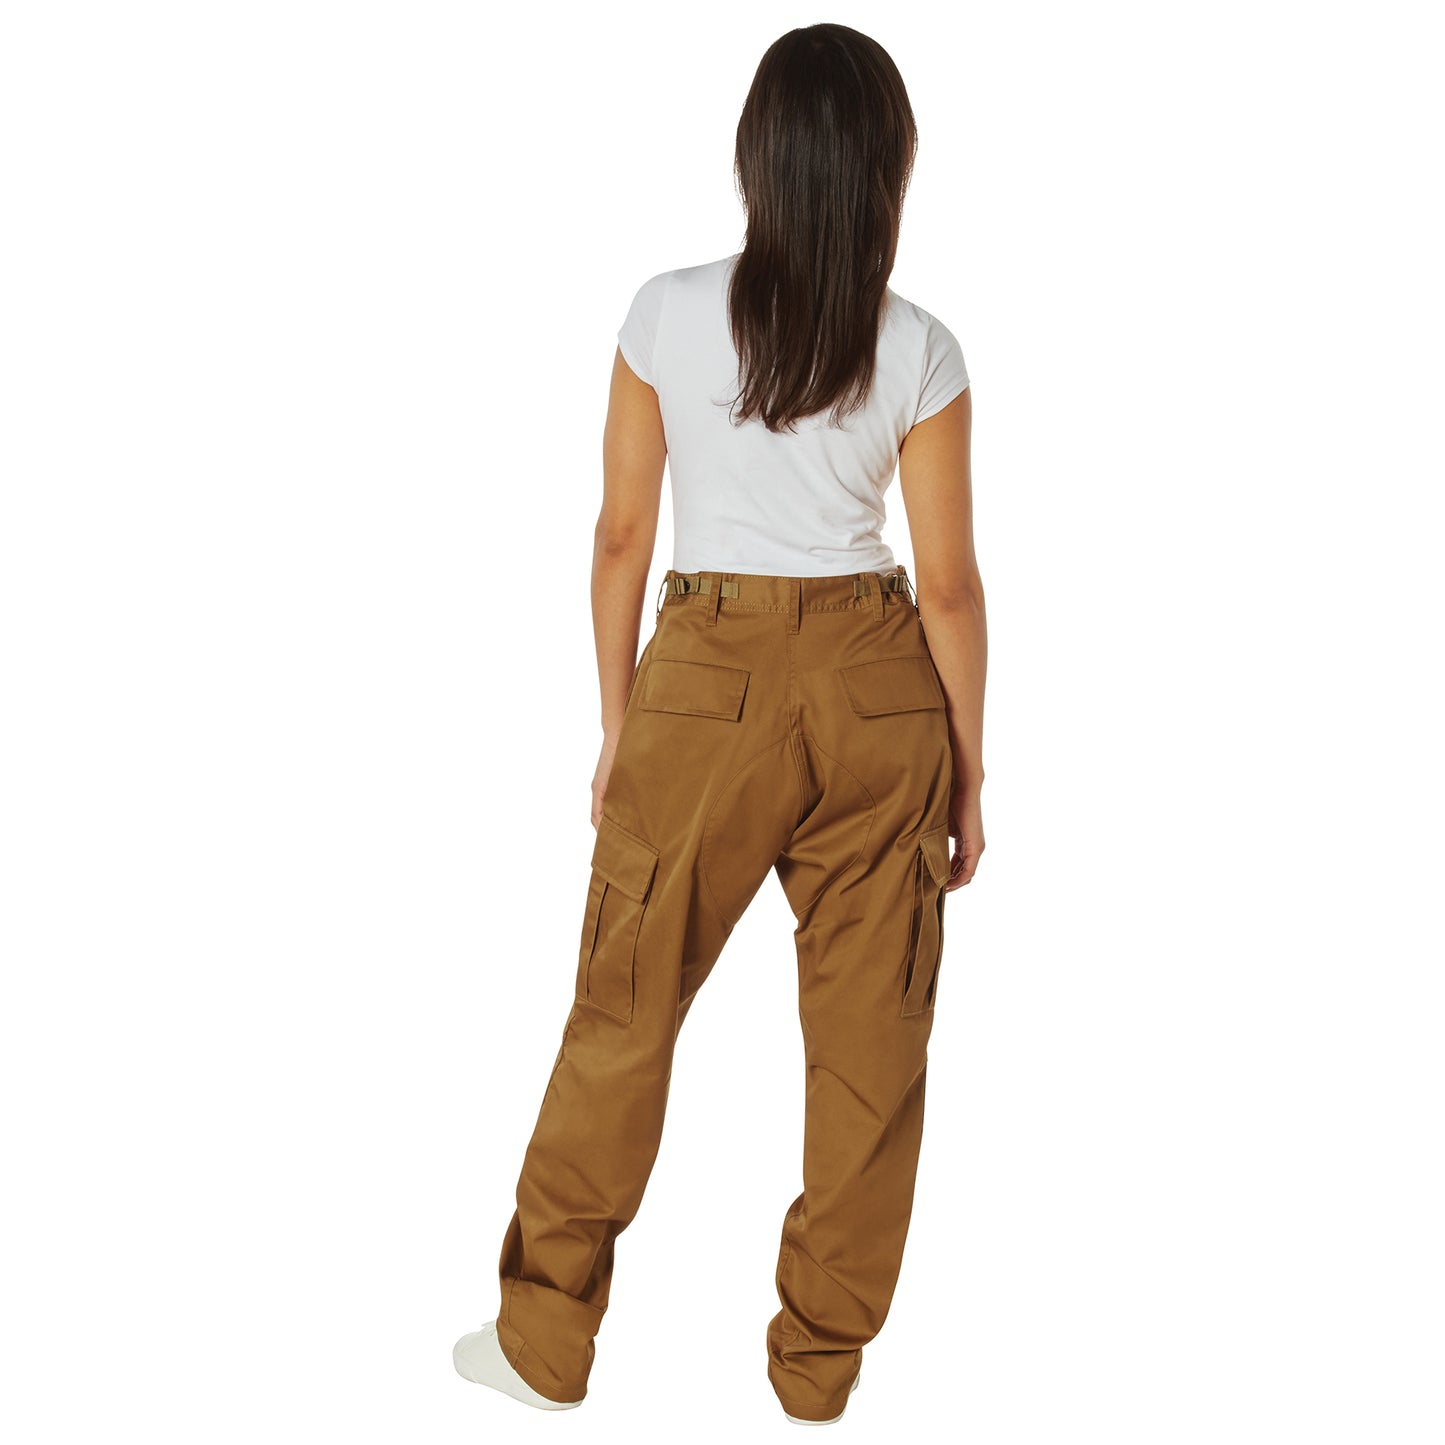 Rothco Tactical BDU Cargo Pants - Work Brown